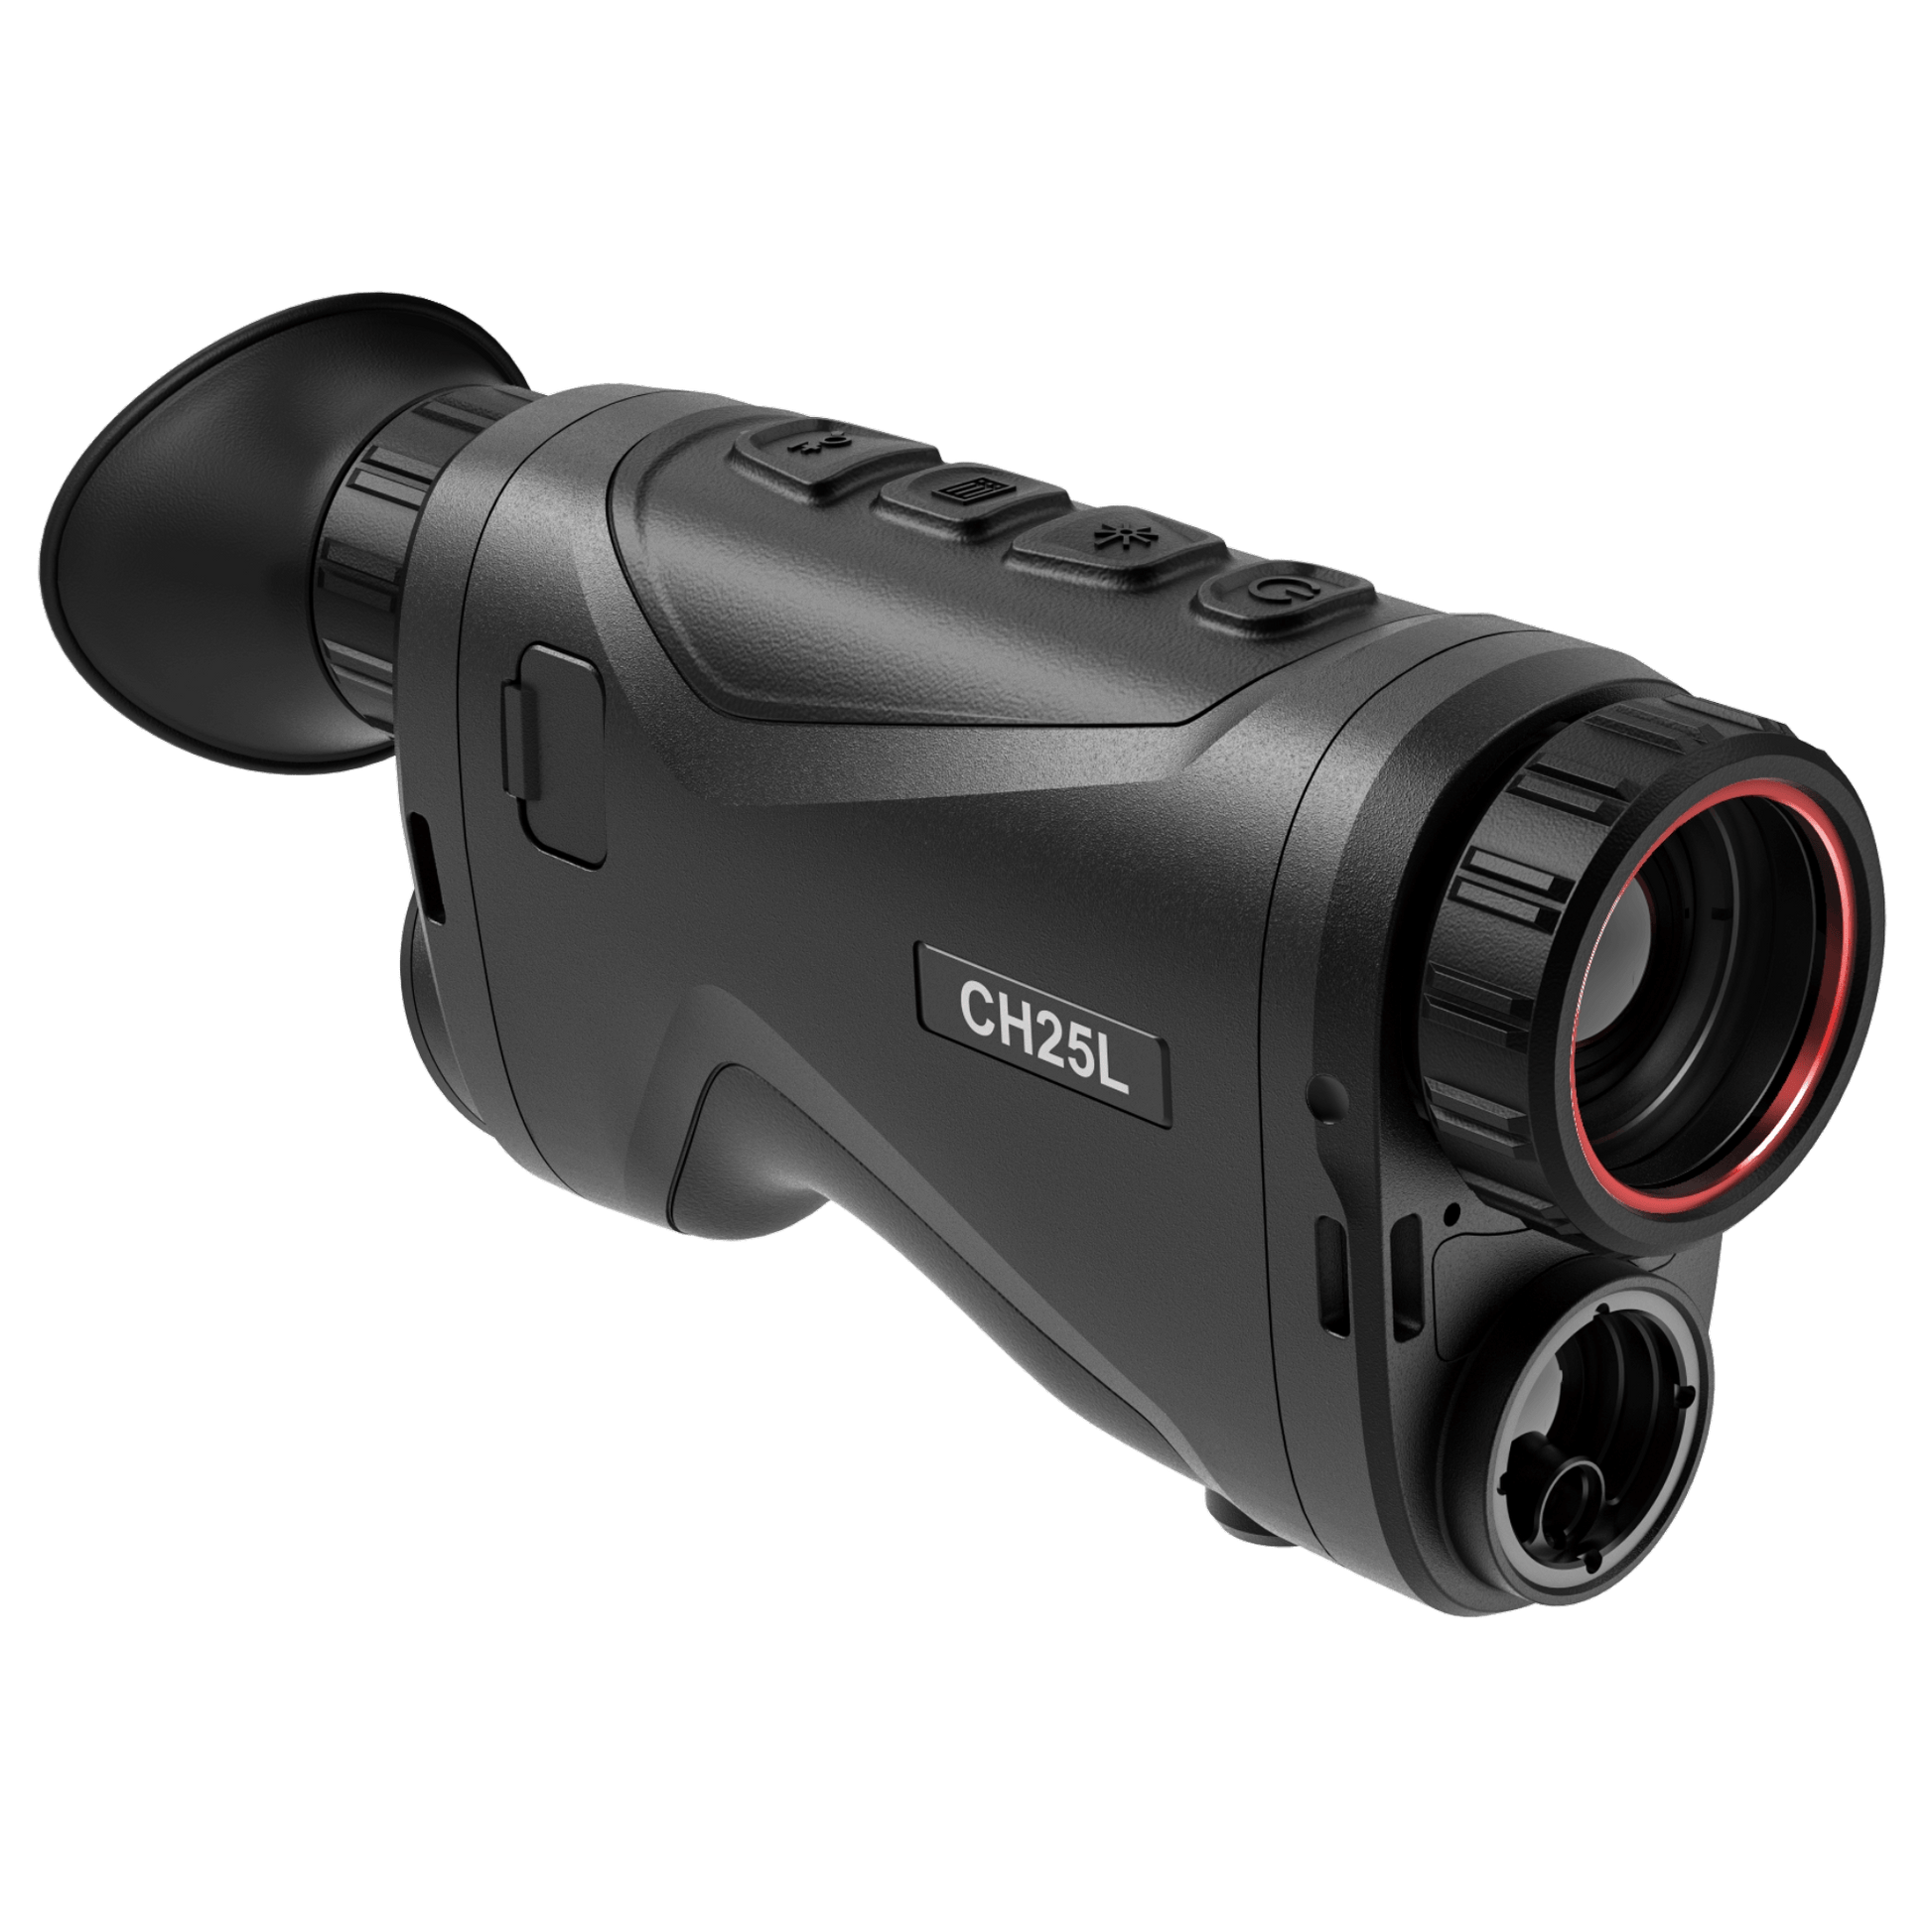 Front Right view of the HikMicro Condor CH25L Thermal Monocular with Rangefinder ocular, displaying its lens and branding.